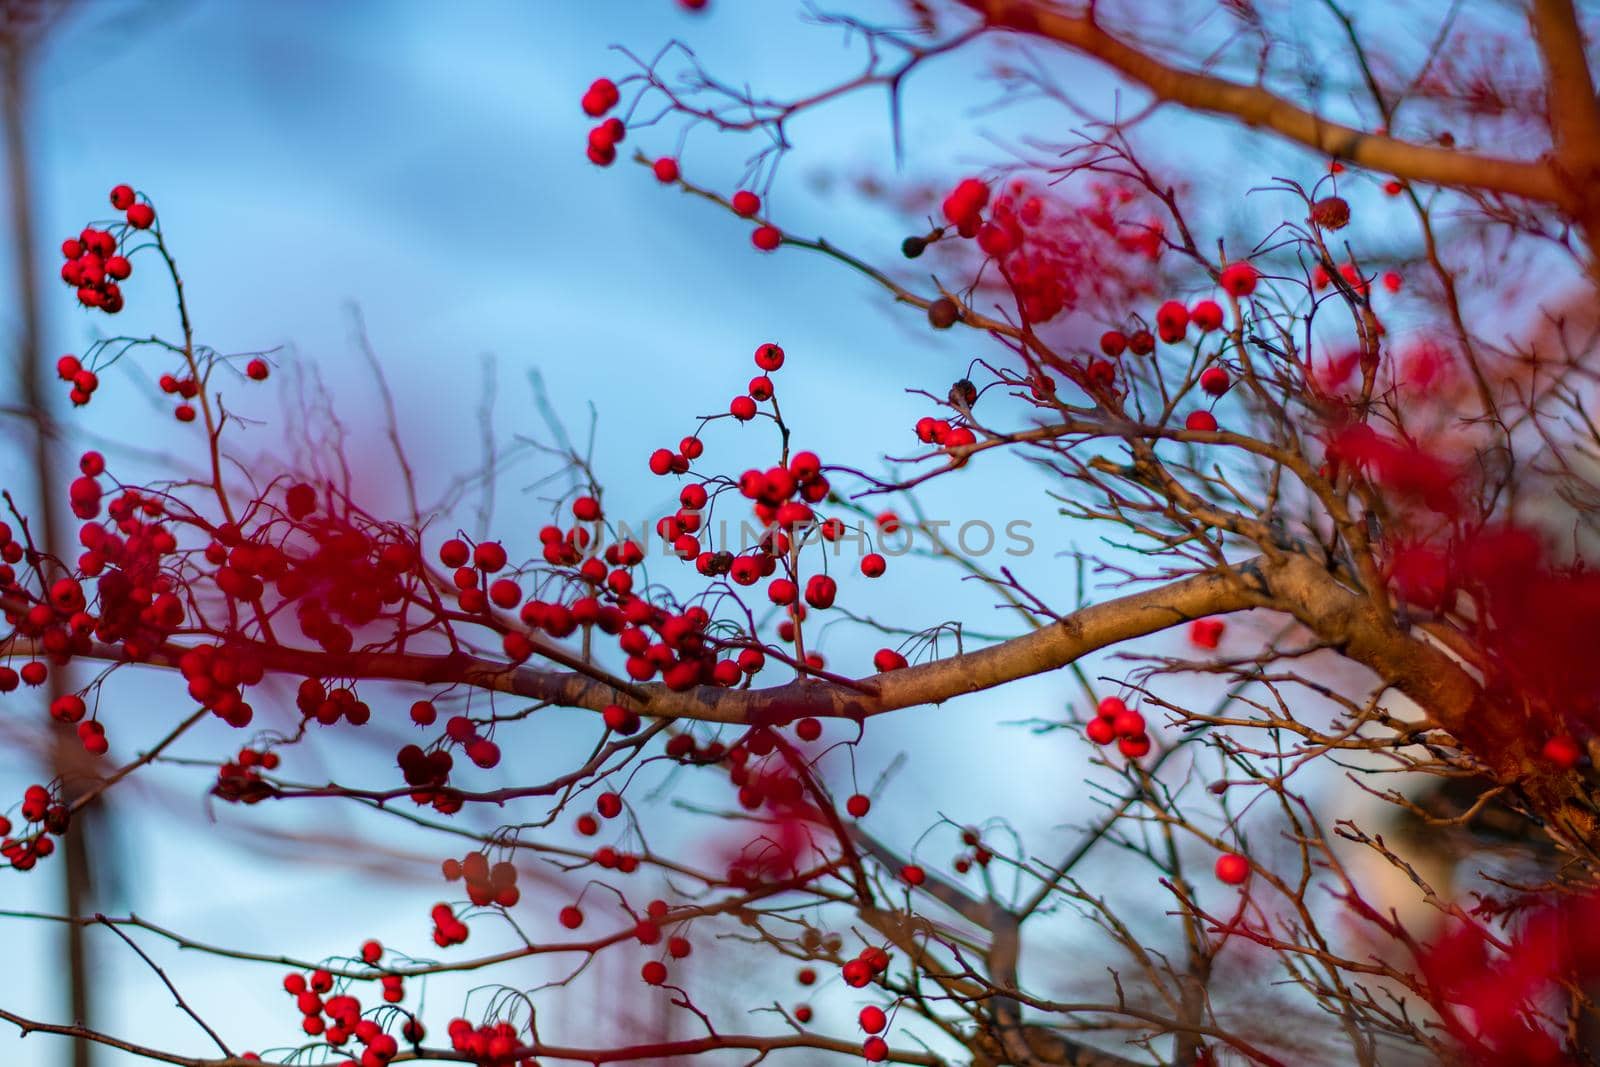 A Tree Branch Covered in Small Red Berries by bju12290